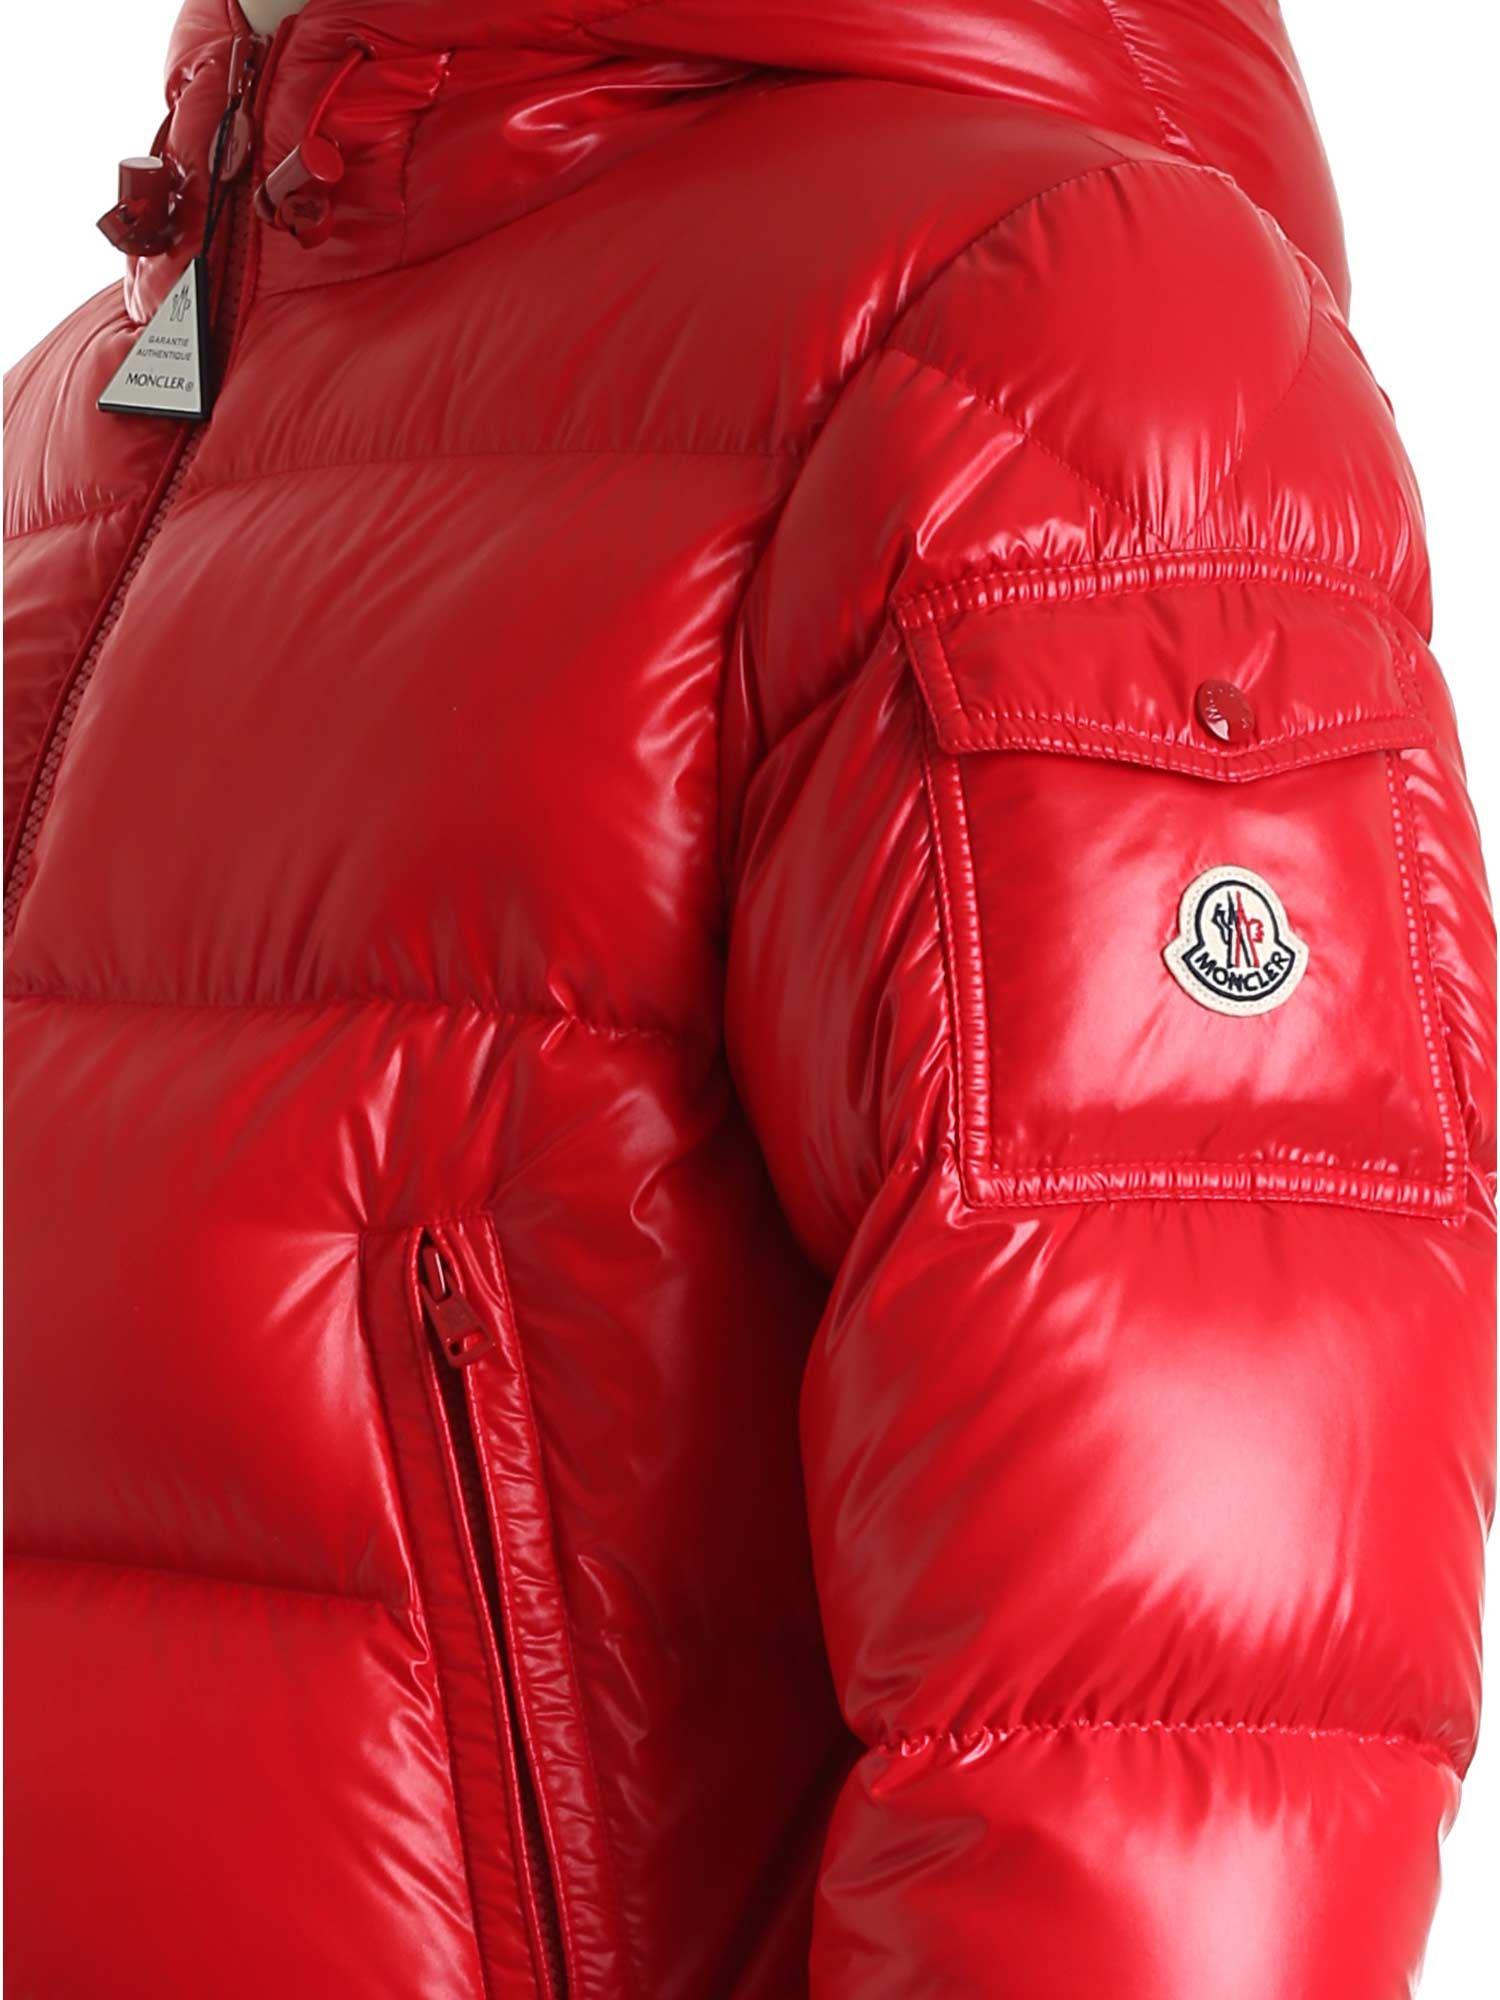 Moncler Ecrins Red Down Jacket Featuring Hood for Men - Lyst